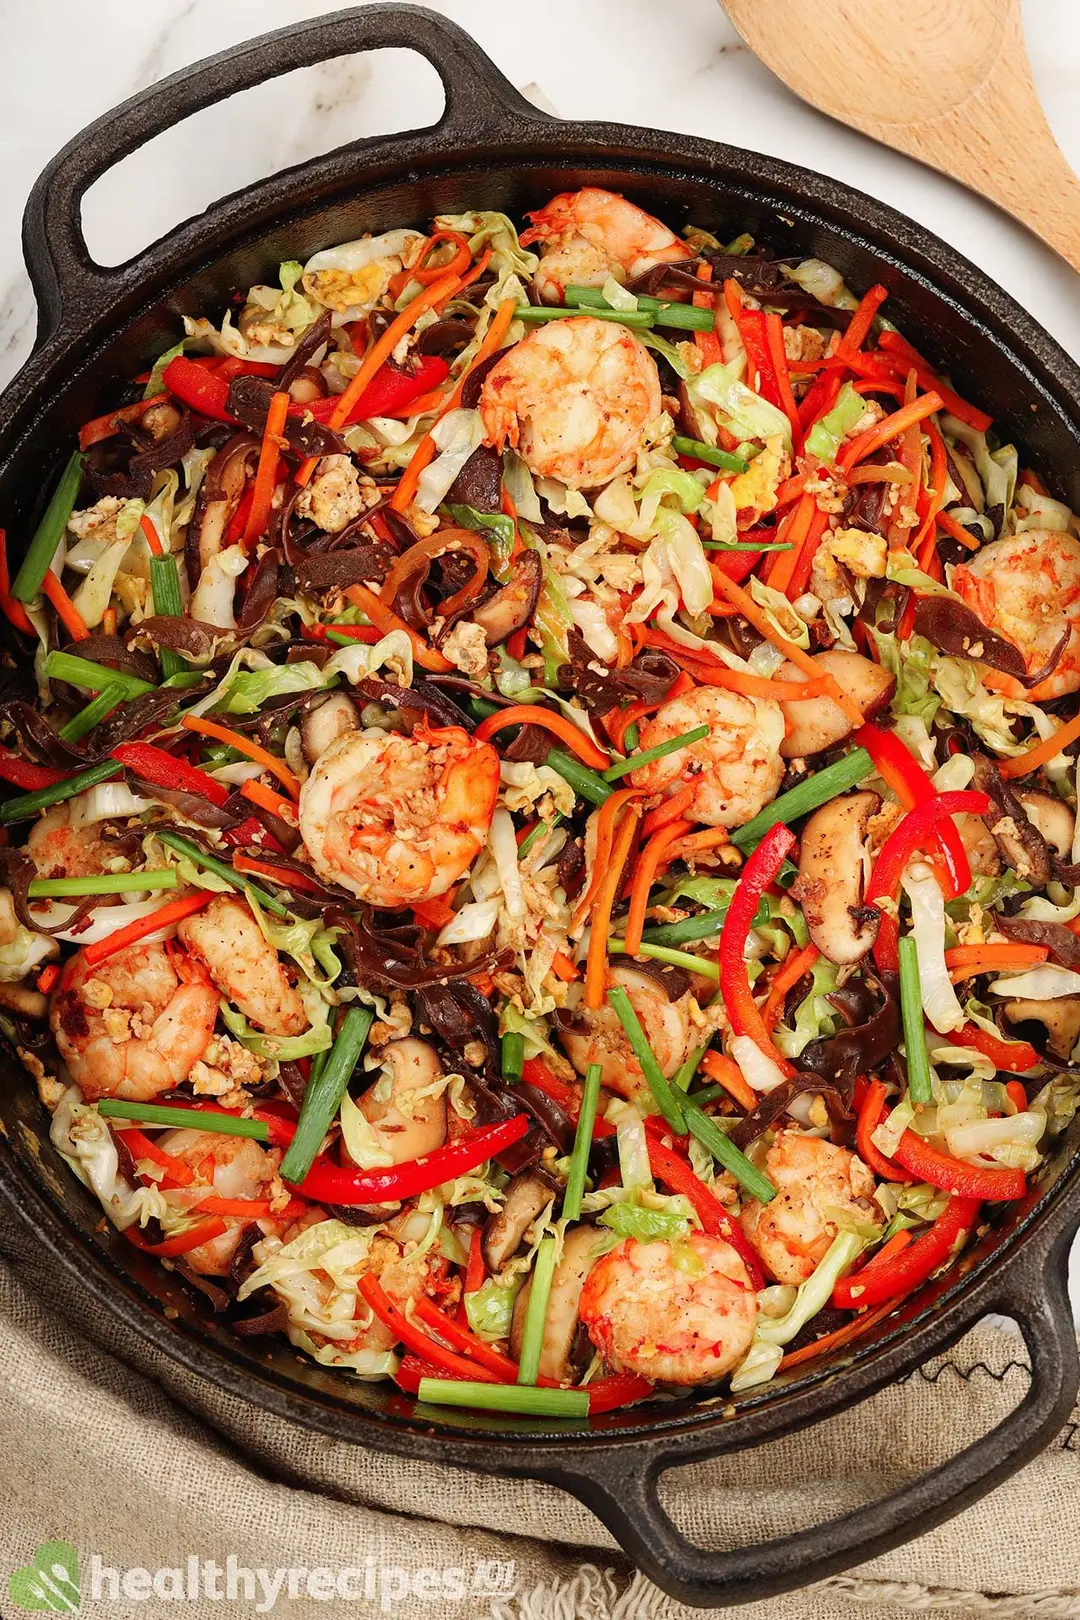 A colorful saute of shrimp, wood ear, carrot, and pepper in a black cast-iron skillet